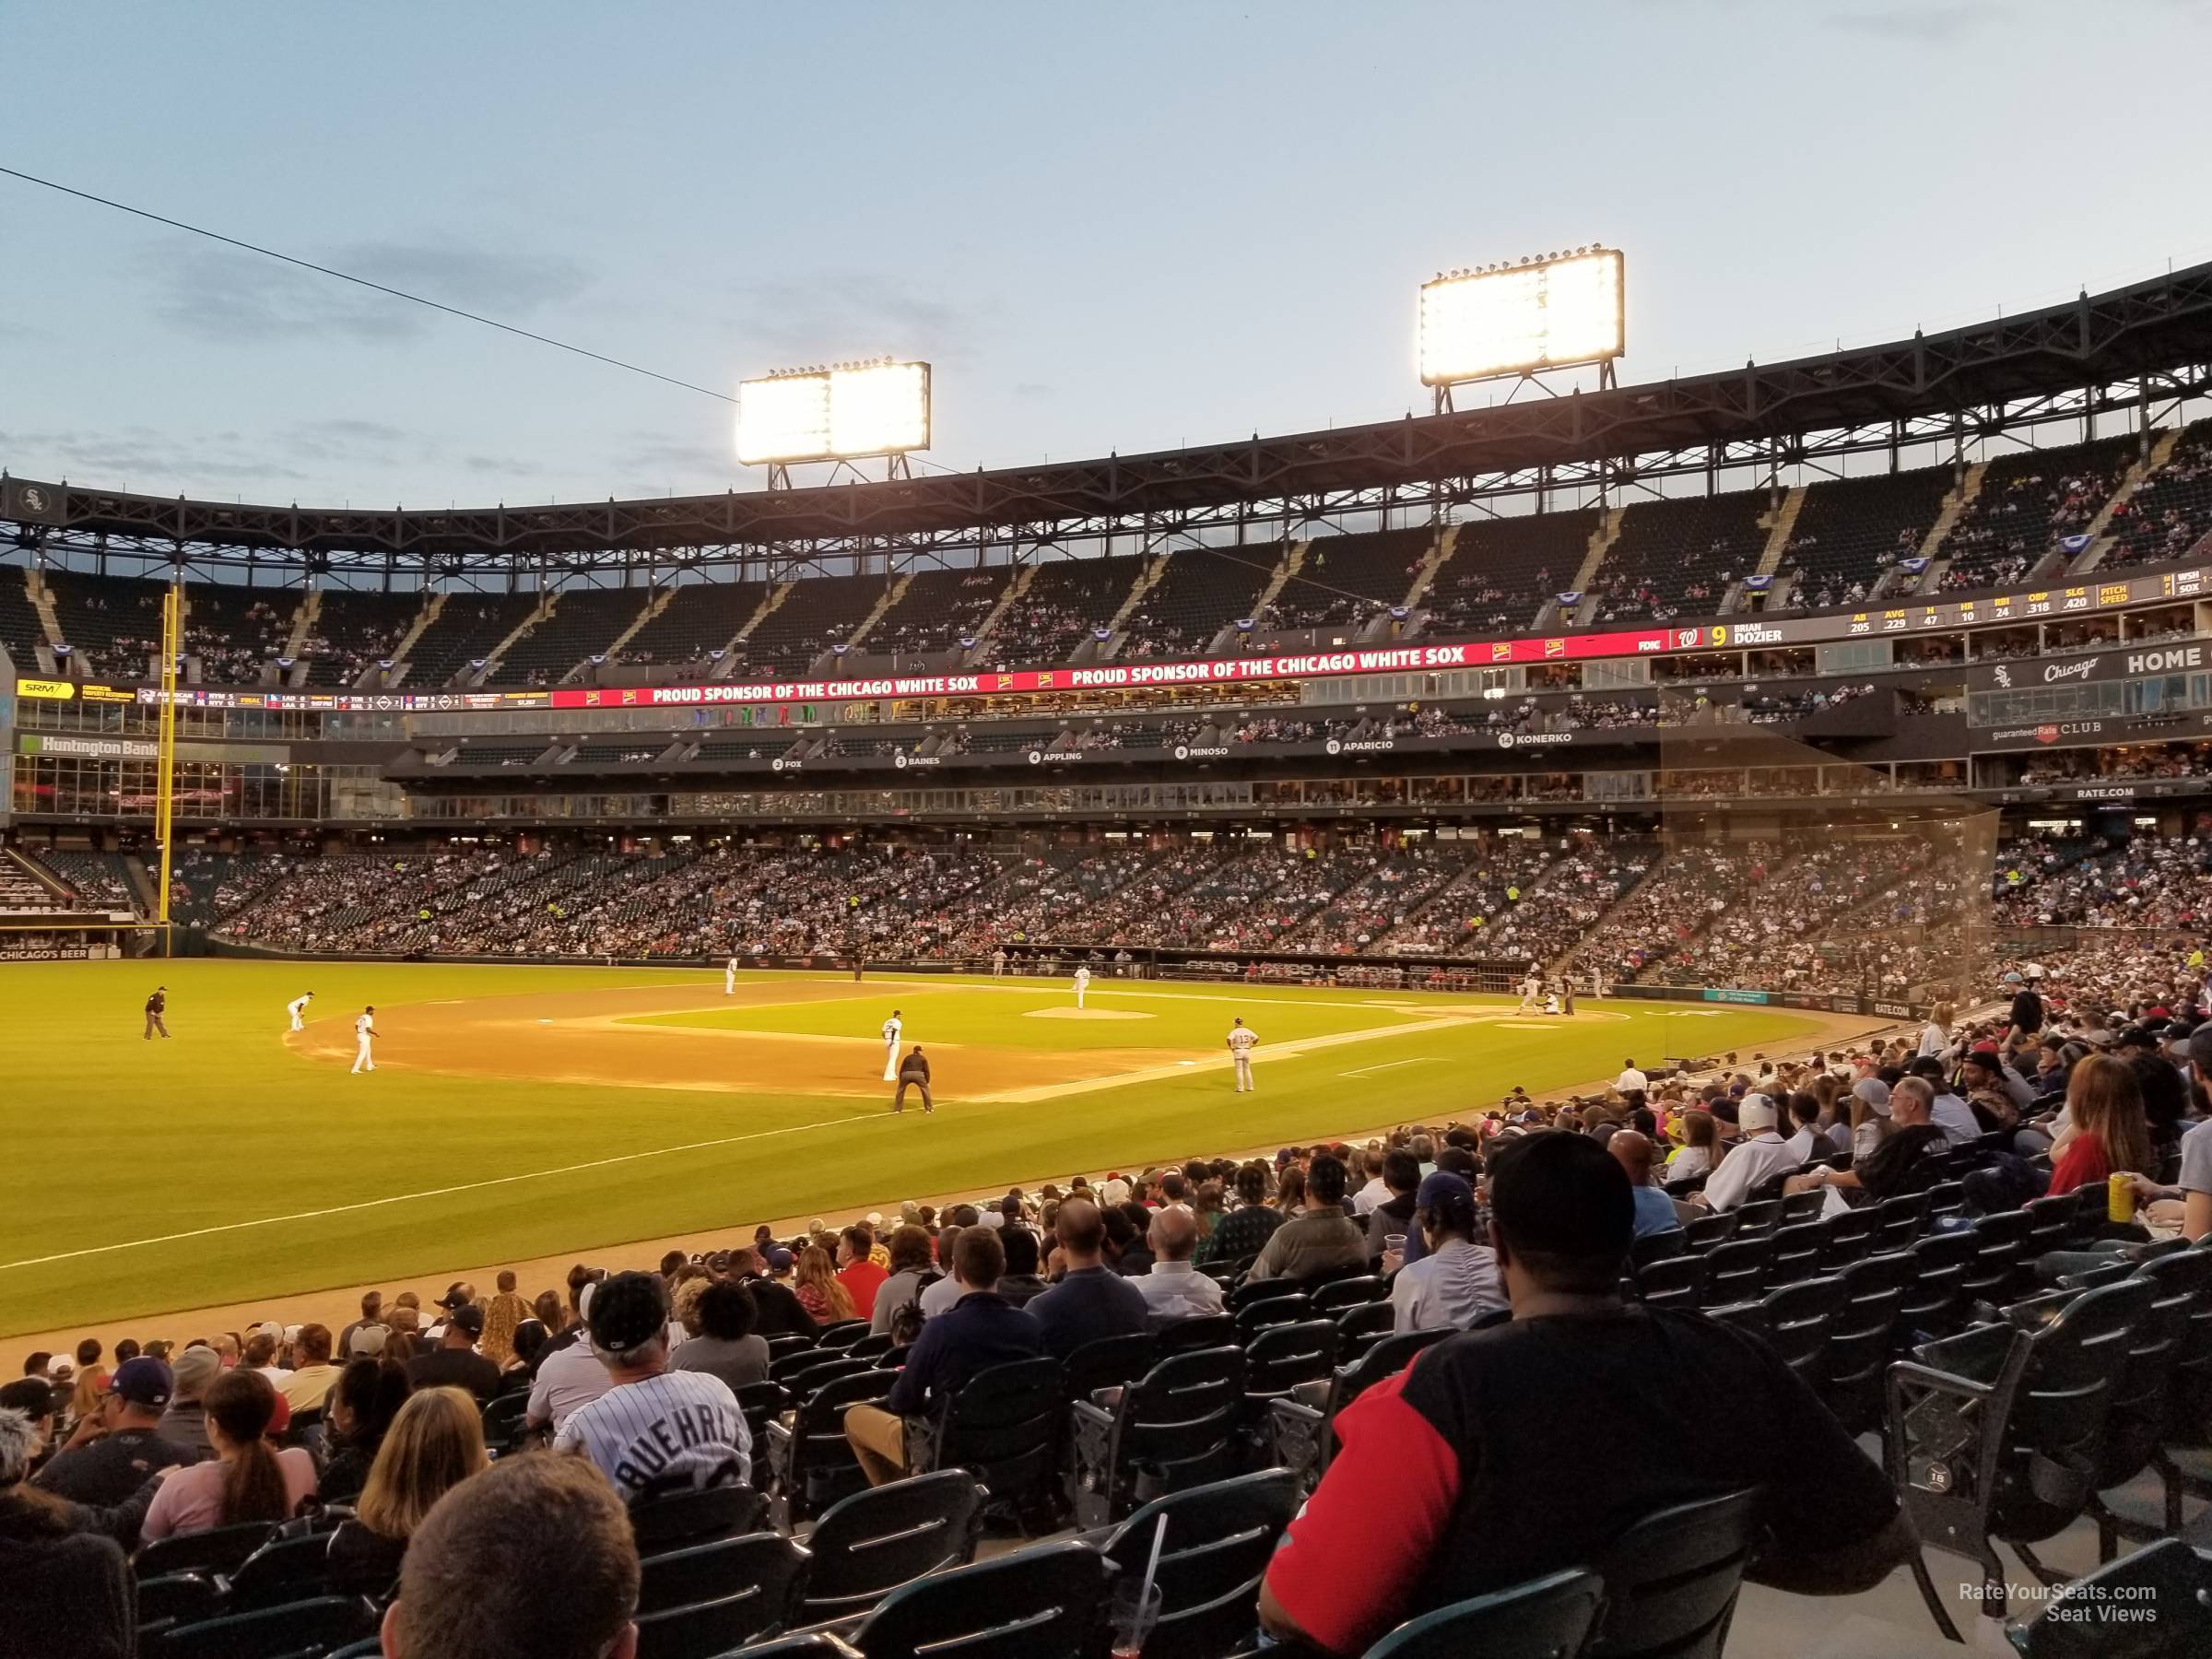 section 148, row 20 seat view  - guaranteed rate field